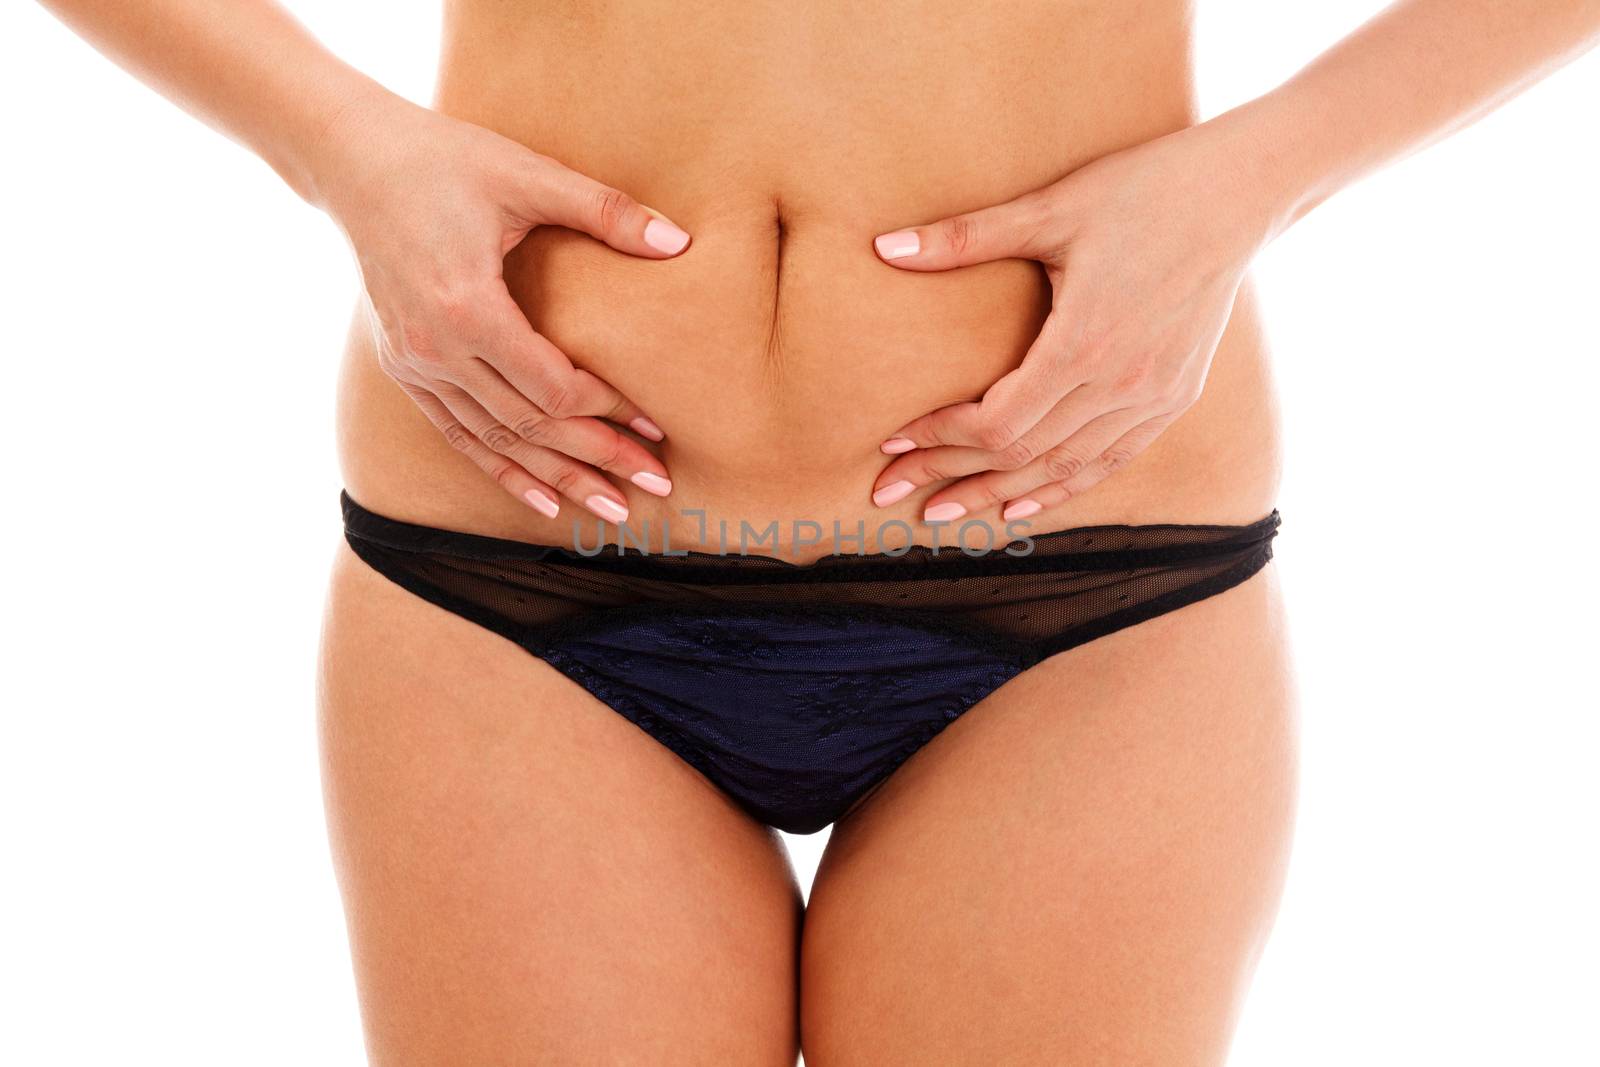 Closeup shot of overweight woman pinching her excessive belly fat, isolated on white background